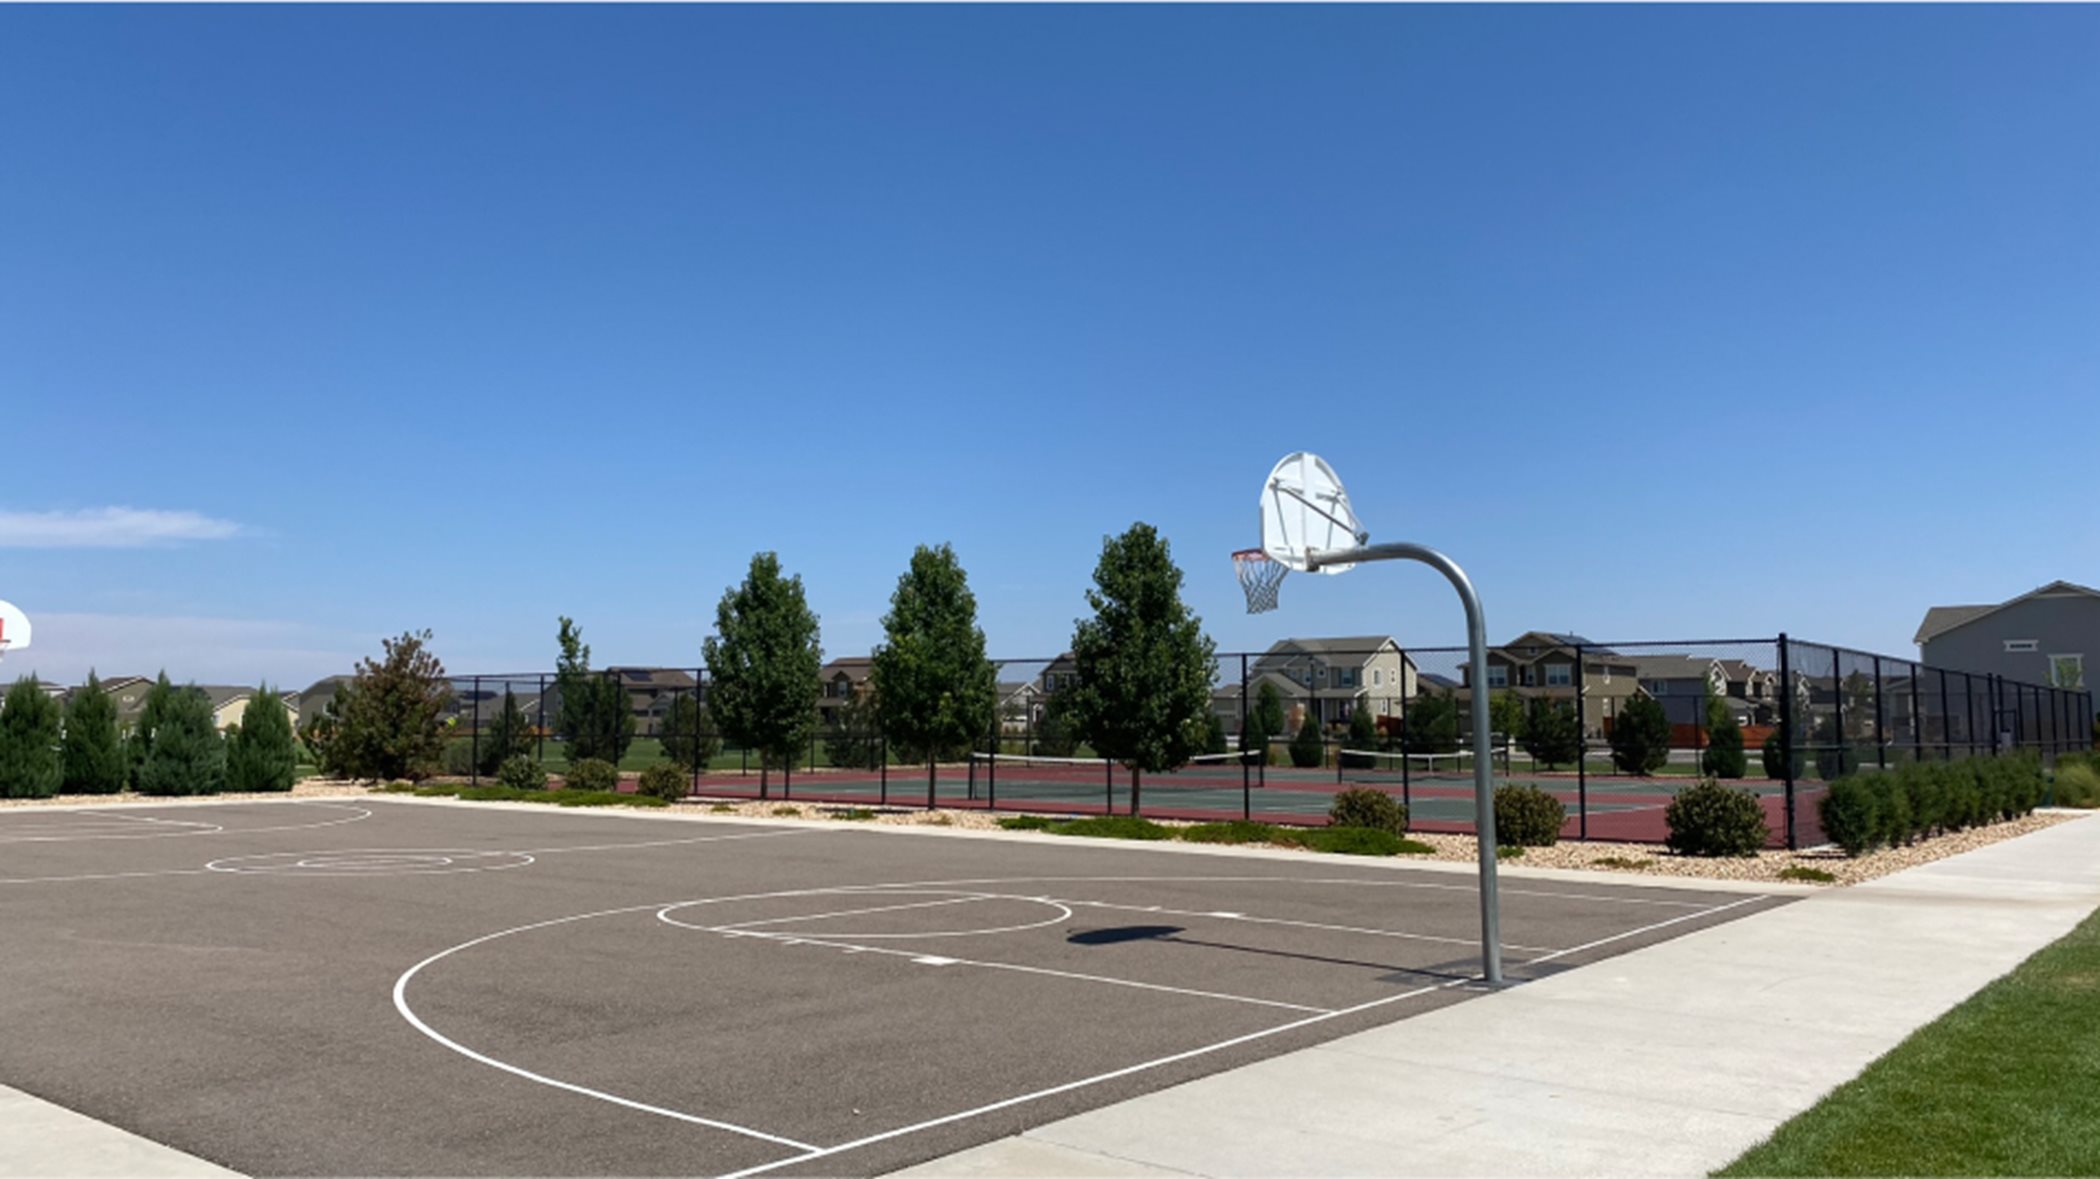 Orchard Farms Basketball Court